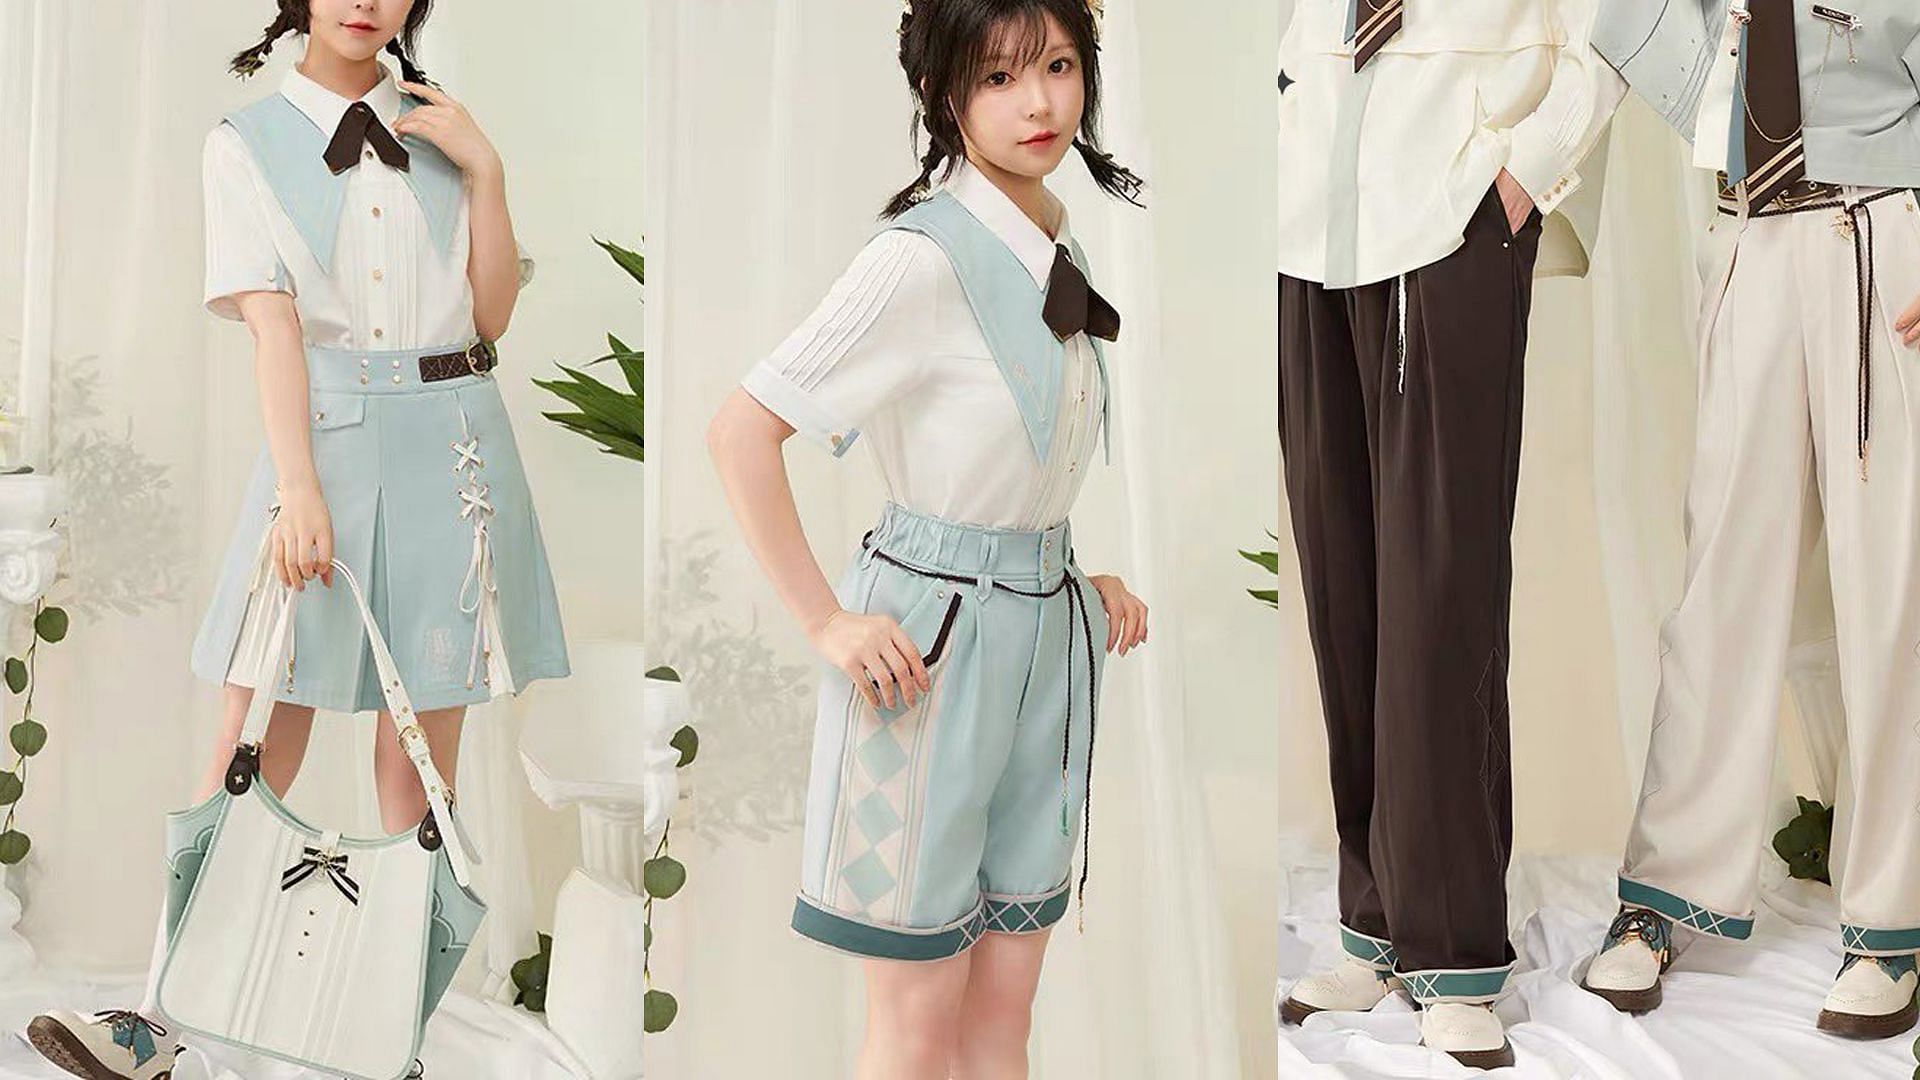 Skirt, shorts, and pants from the Venti collection (Image via HoYoverse)